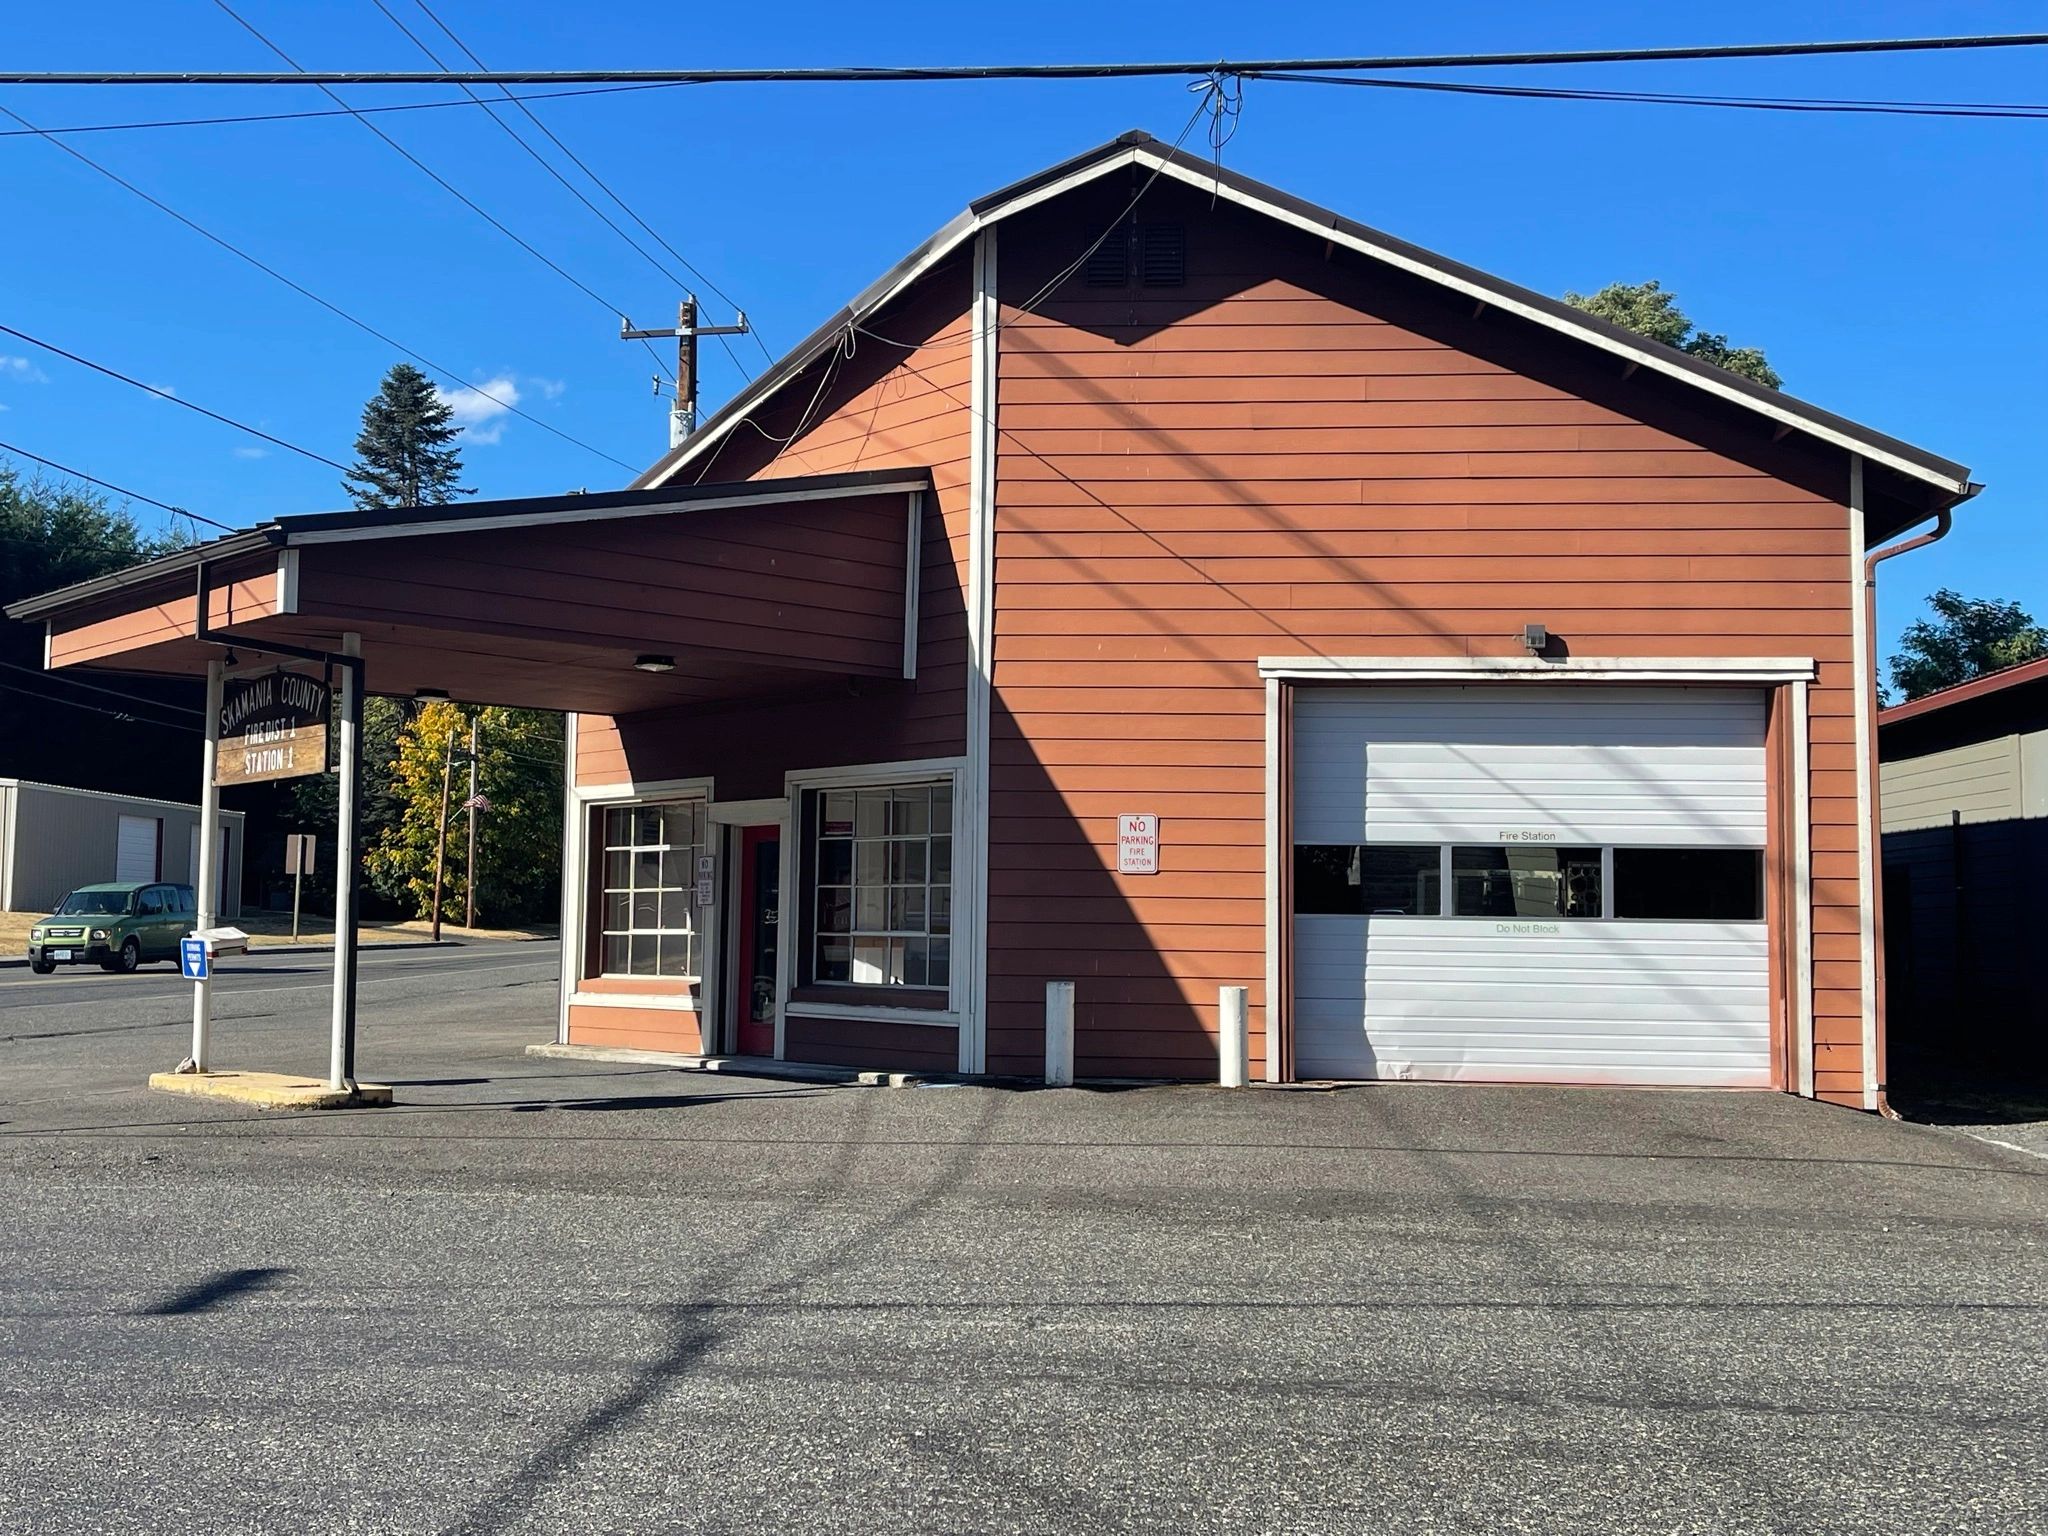 Skamania County Fire District 1 station 1